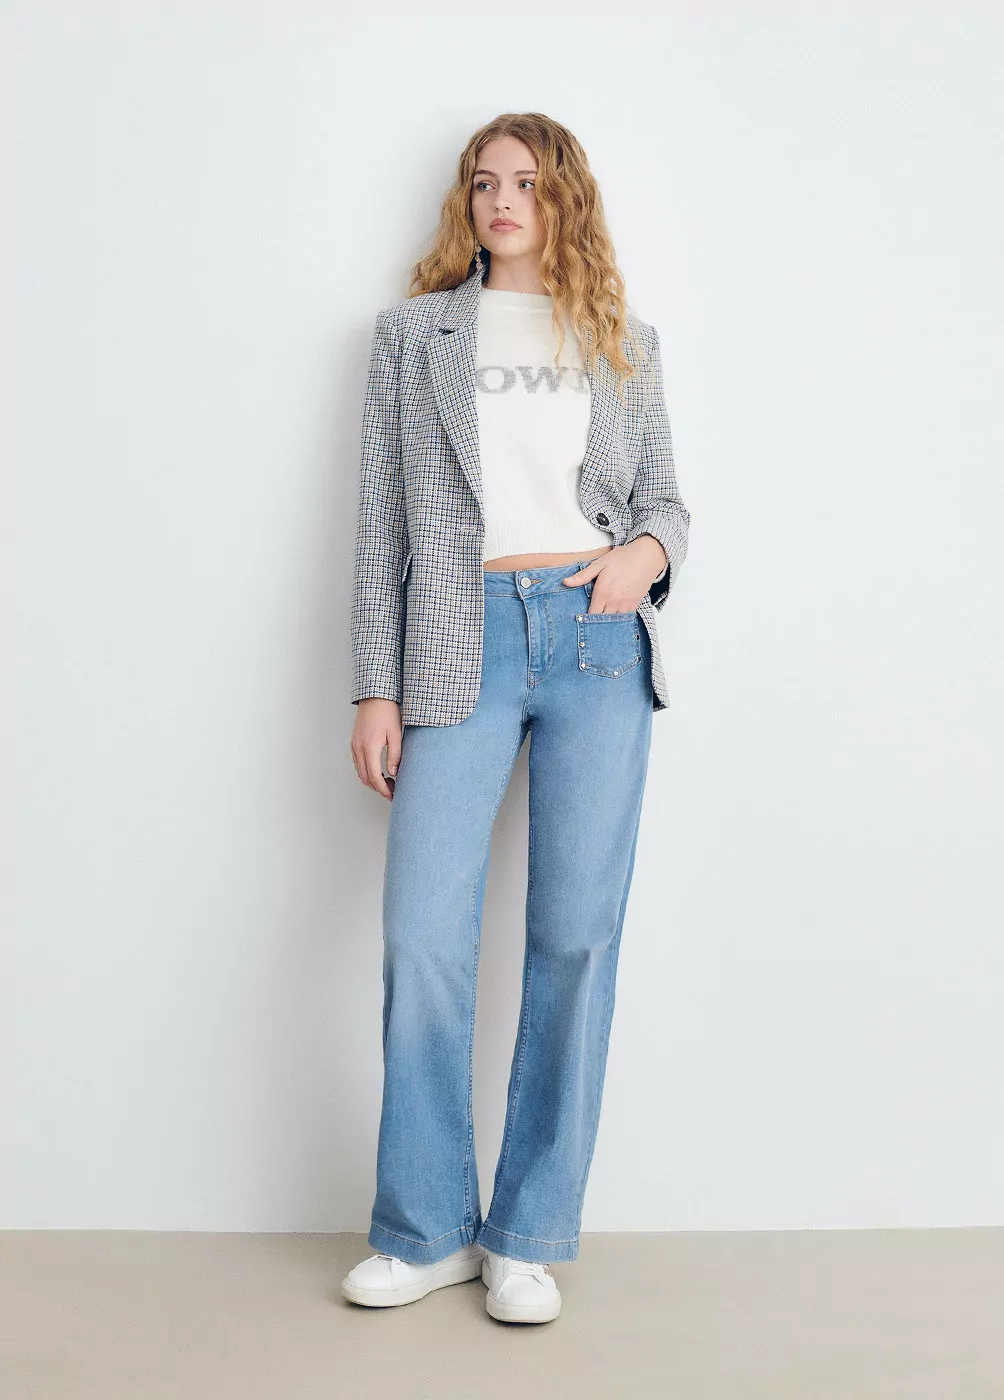 Culotte jeans with stars